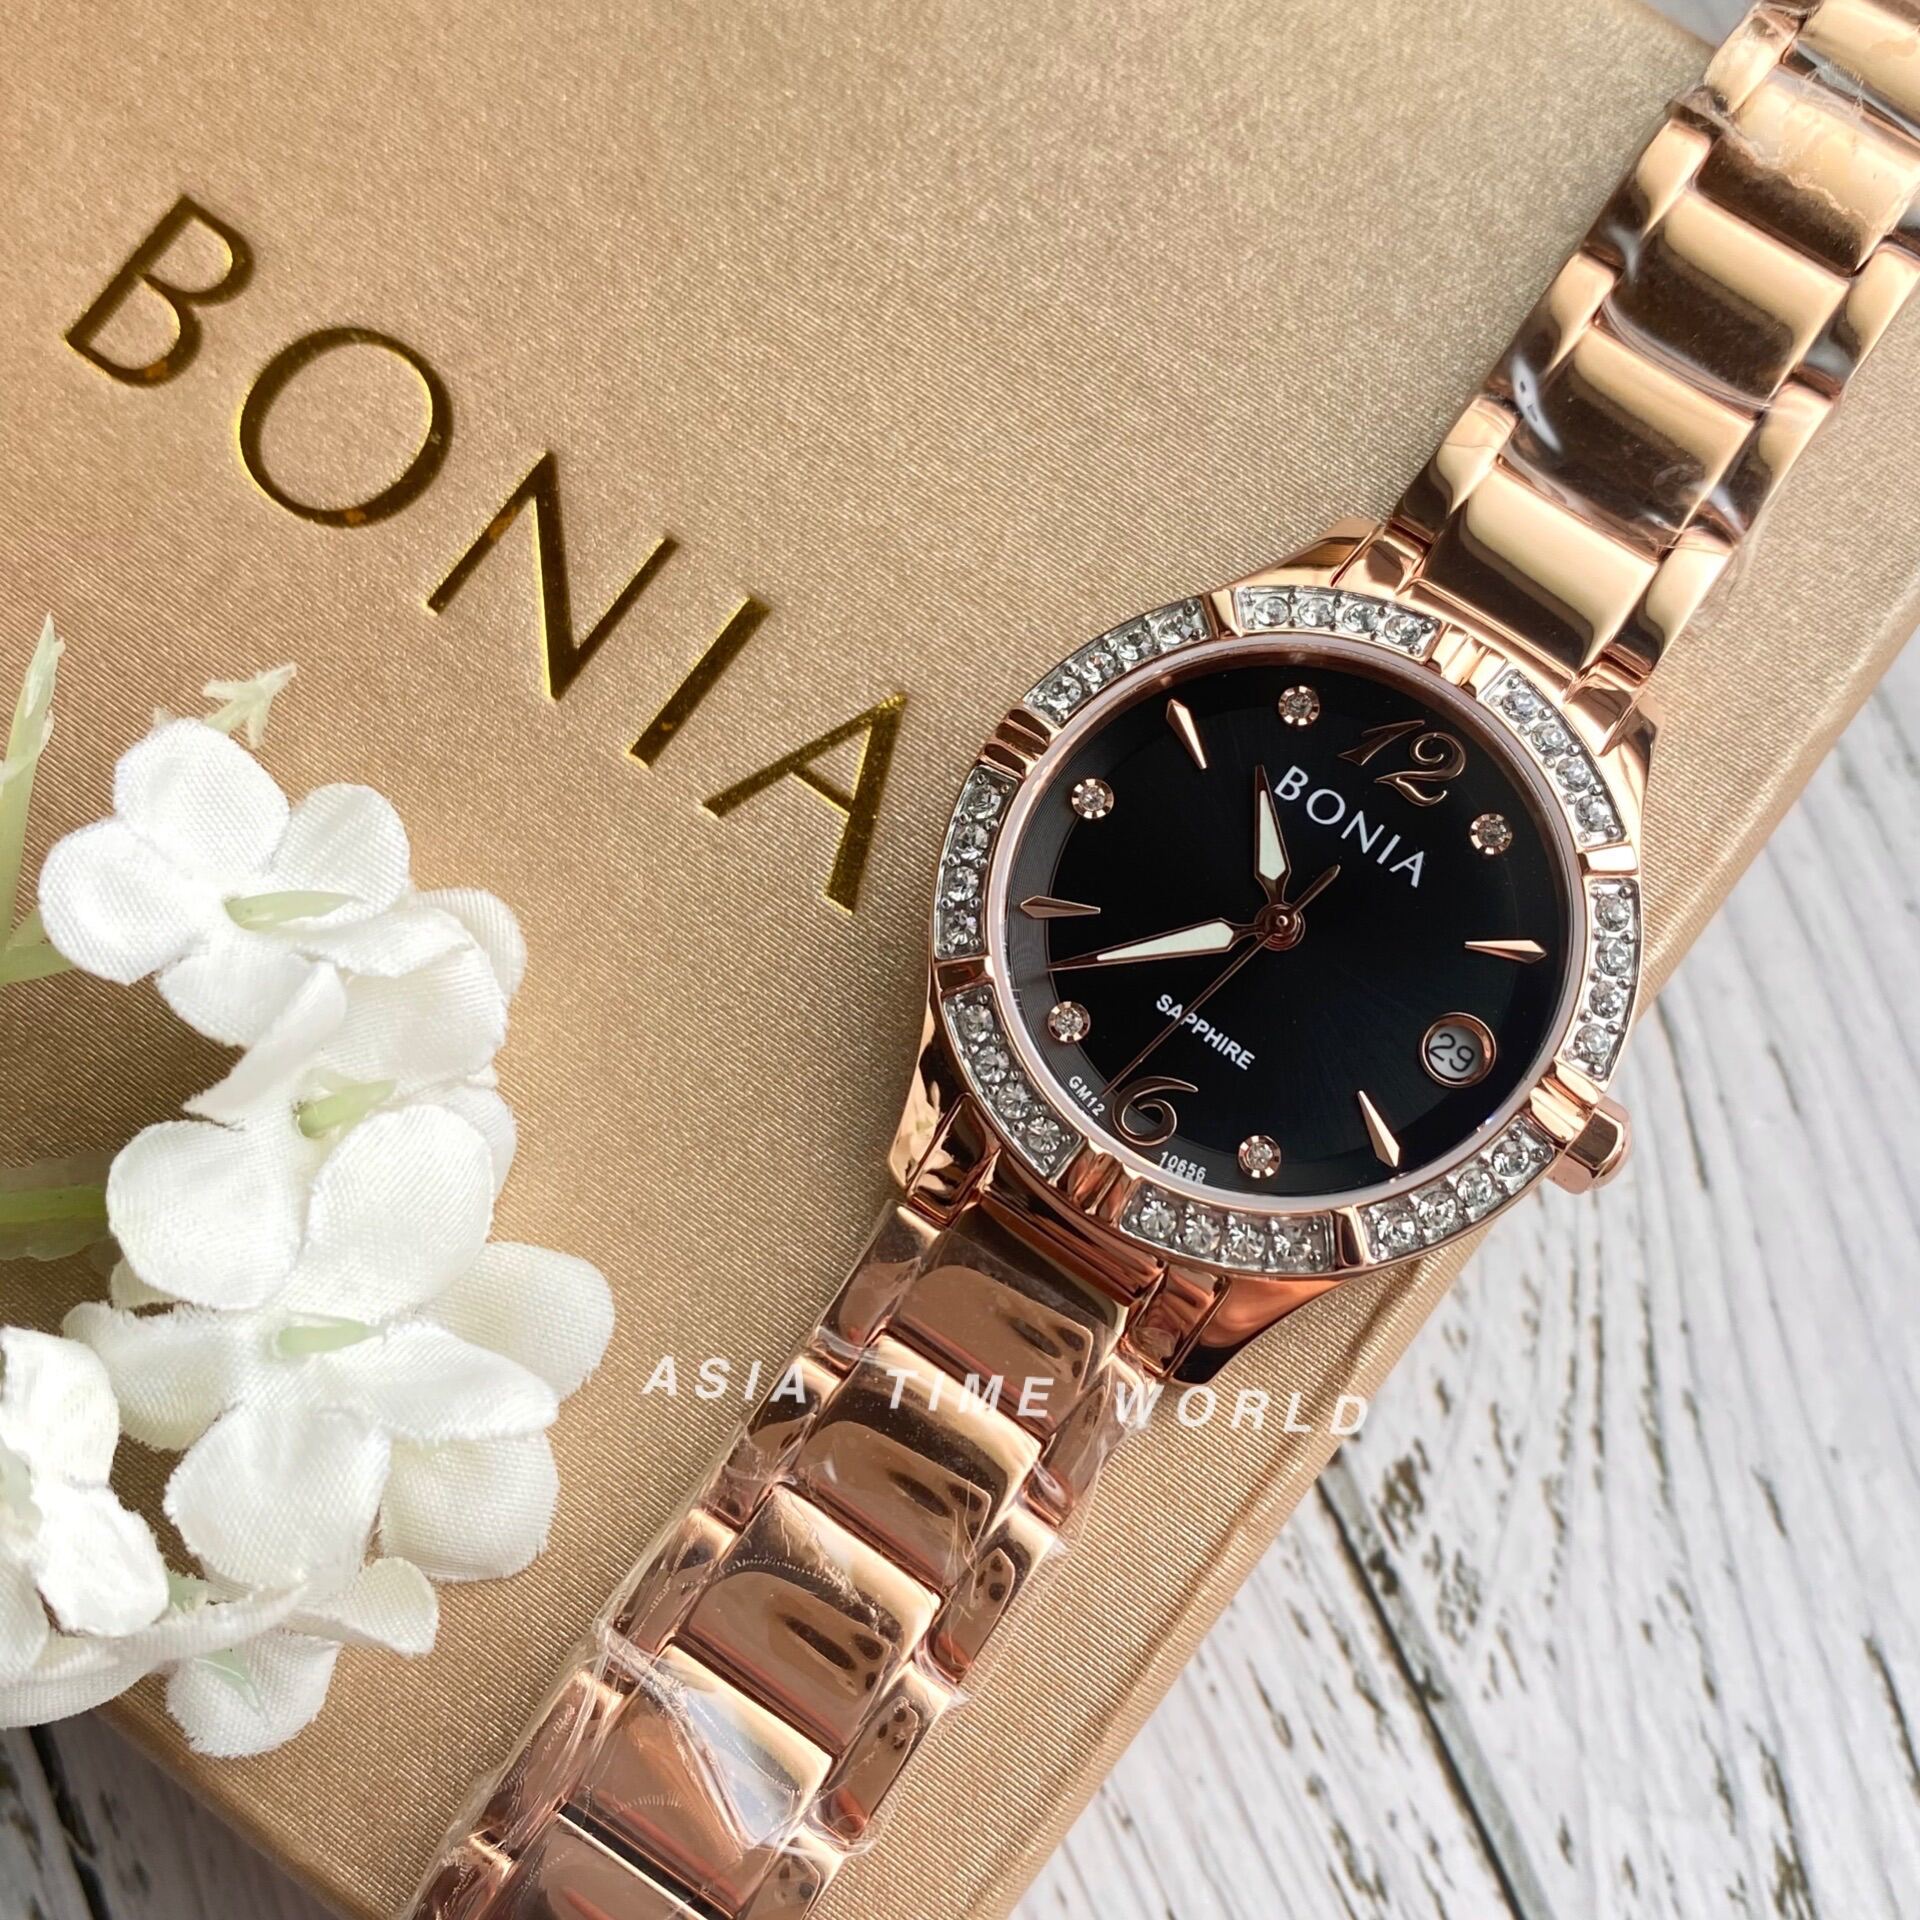 Original] Bonia BNB10667-2317S Elegance Women Watch with Sapphire Glass  Silver Stainless Steel Decorated Fine Crystals